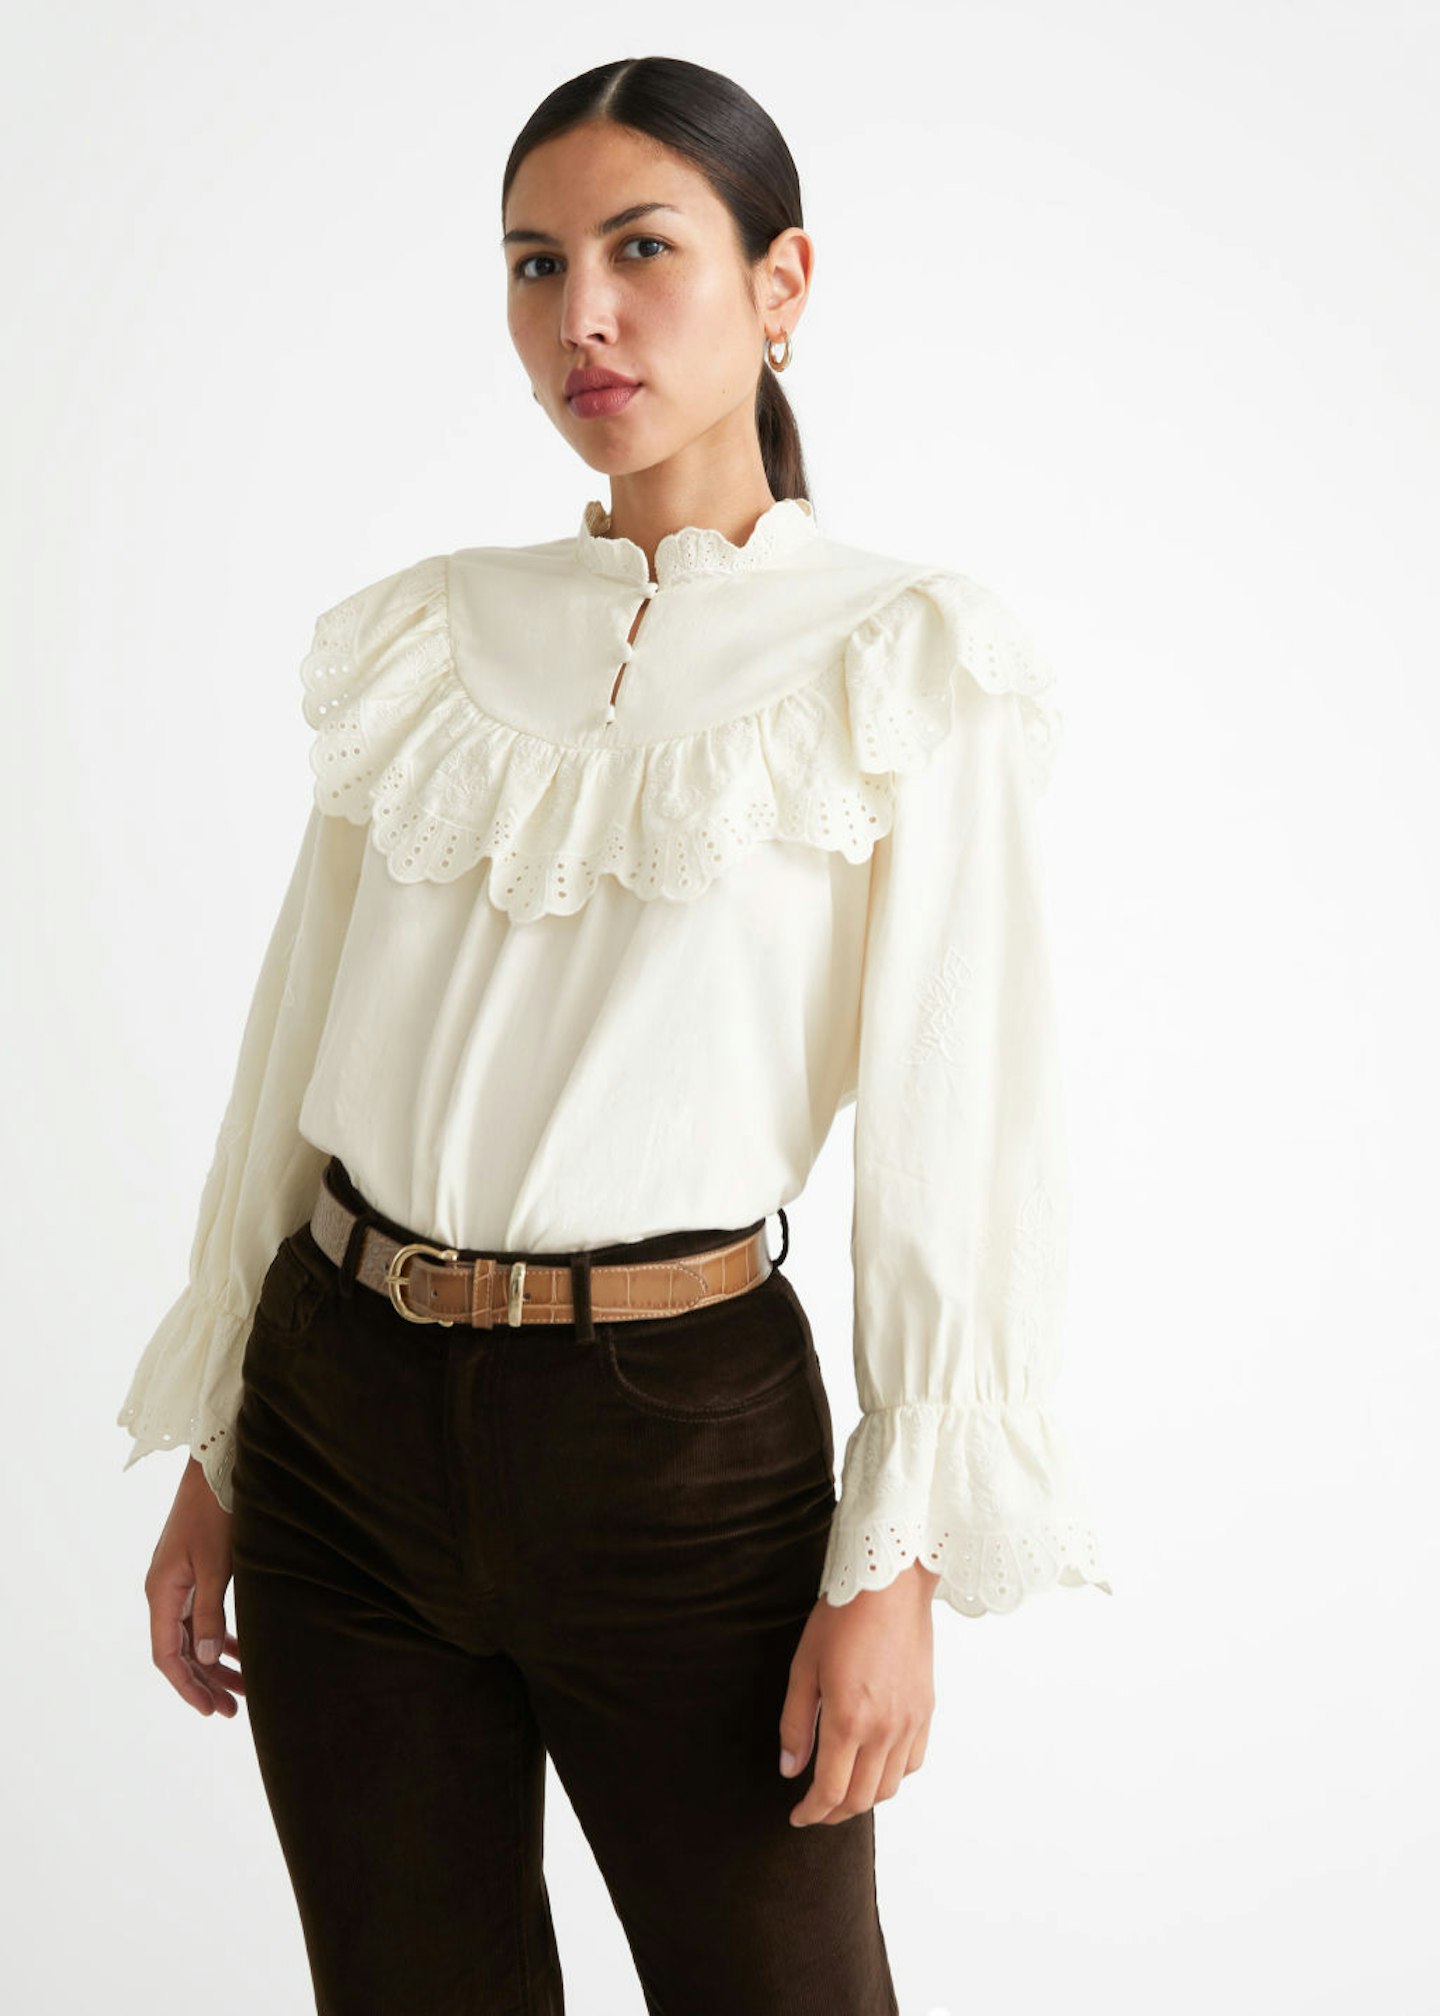 & Other Stories, Embroidered Overlay Blouse, £75